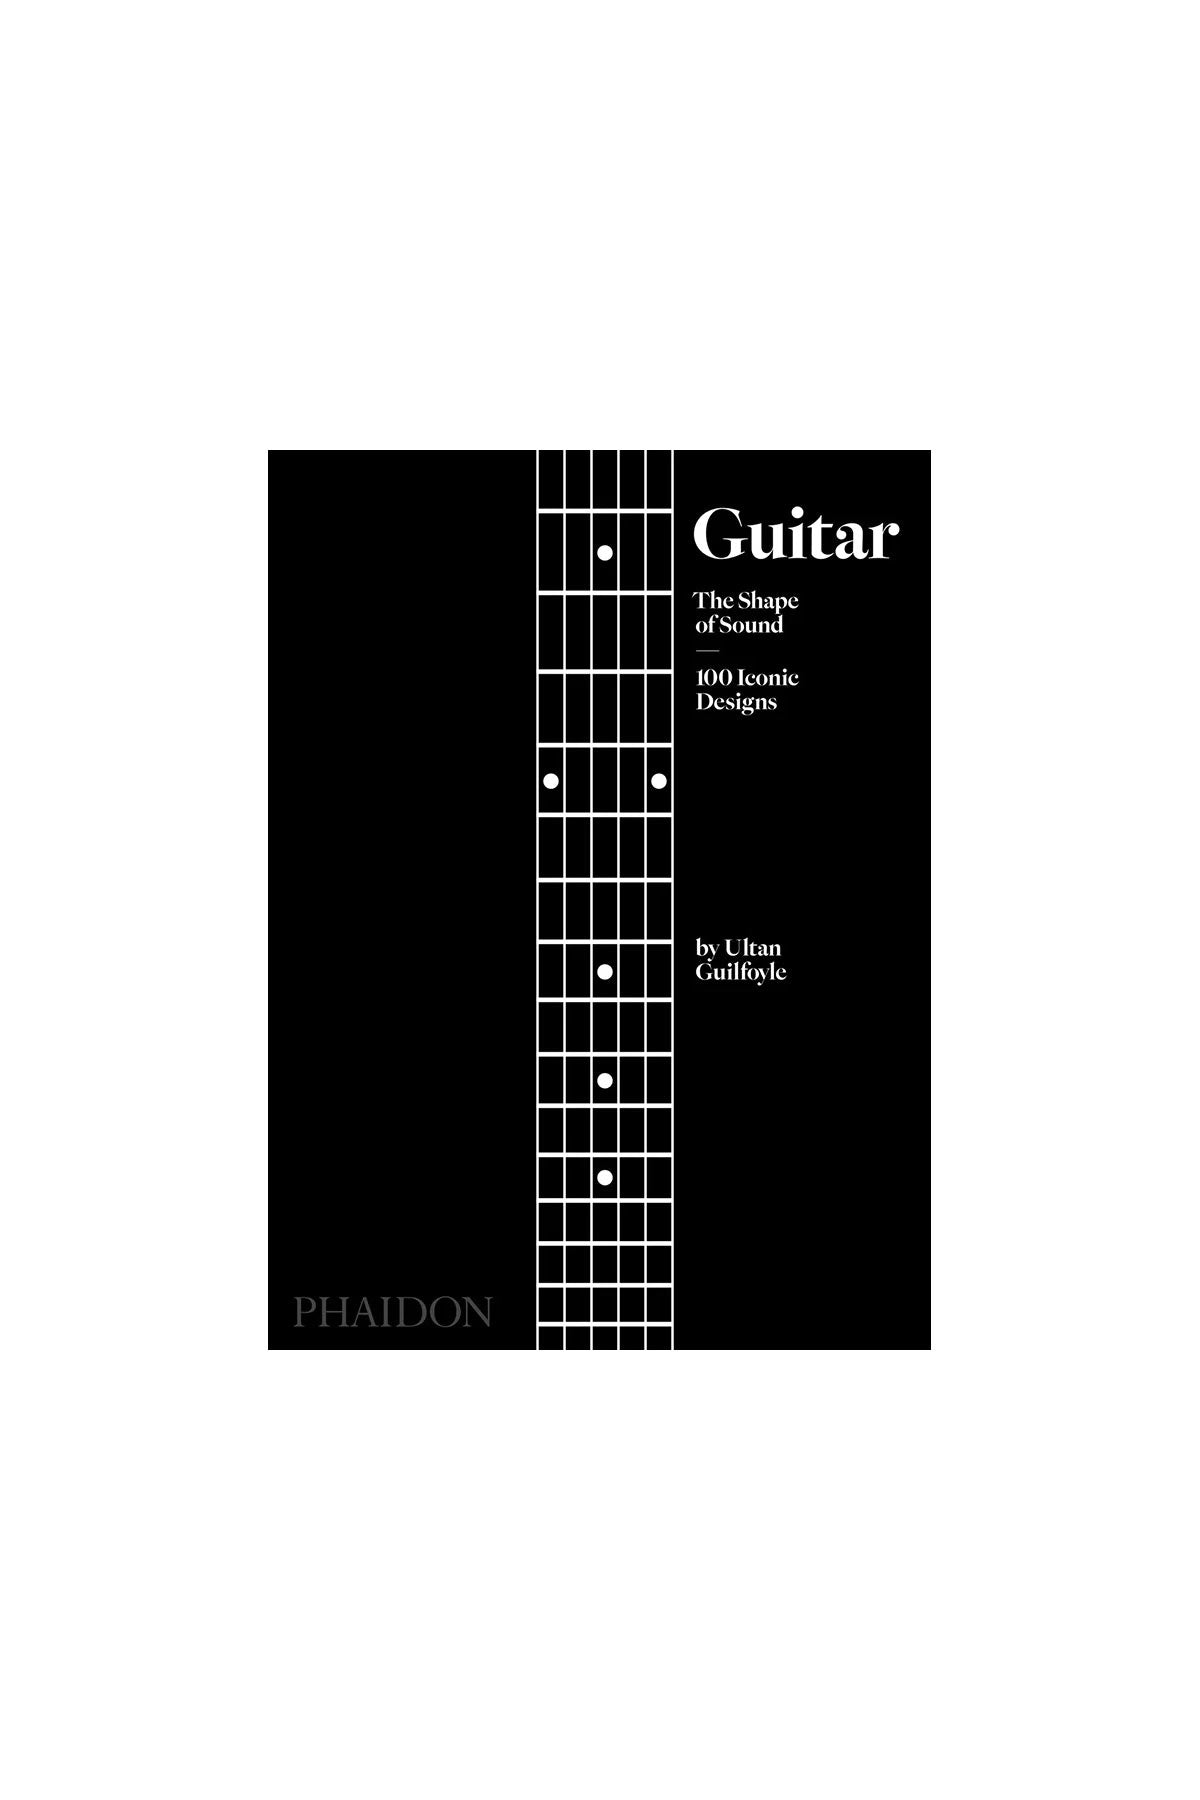 GUITAR: THE SHAPE OF SOUND (100 Iconic Designs)